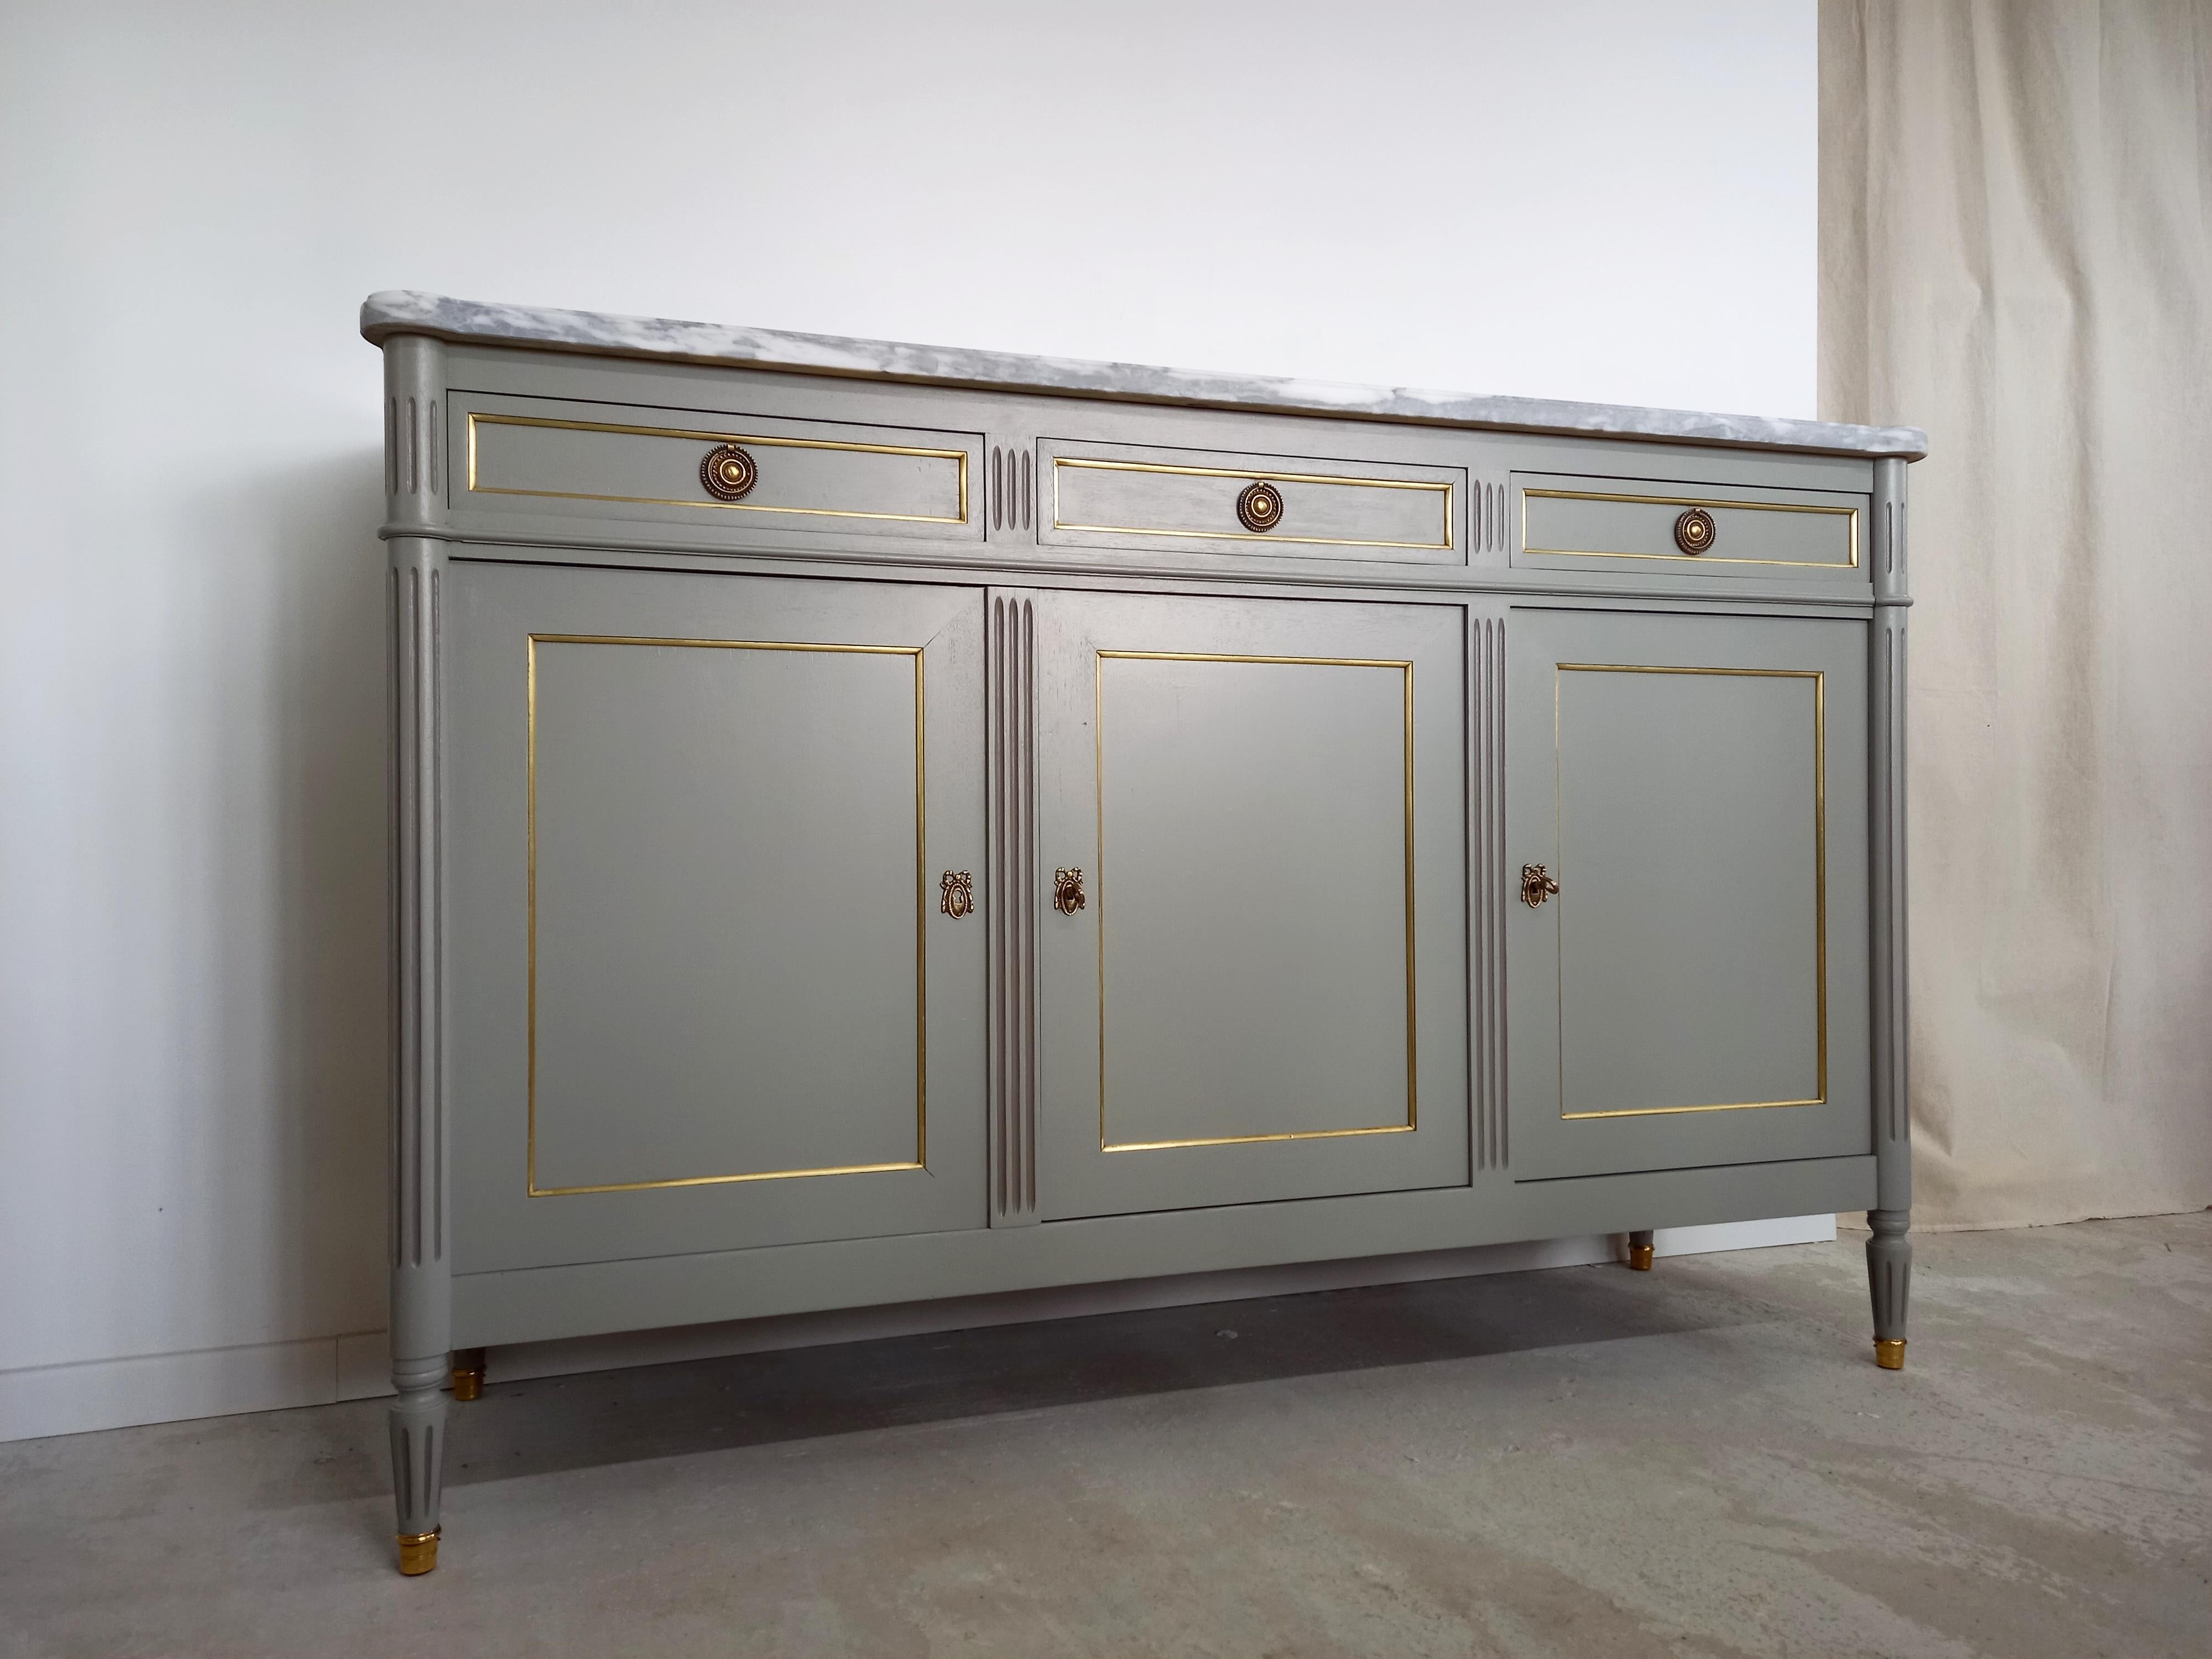 Antique French, Louis XVI style buffet topped with a superb white and grey marble, fluted legs finished with golden bronze clogs.
Three dovetailed drawers and doors with brass and bronze details, 2 keys.